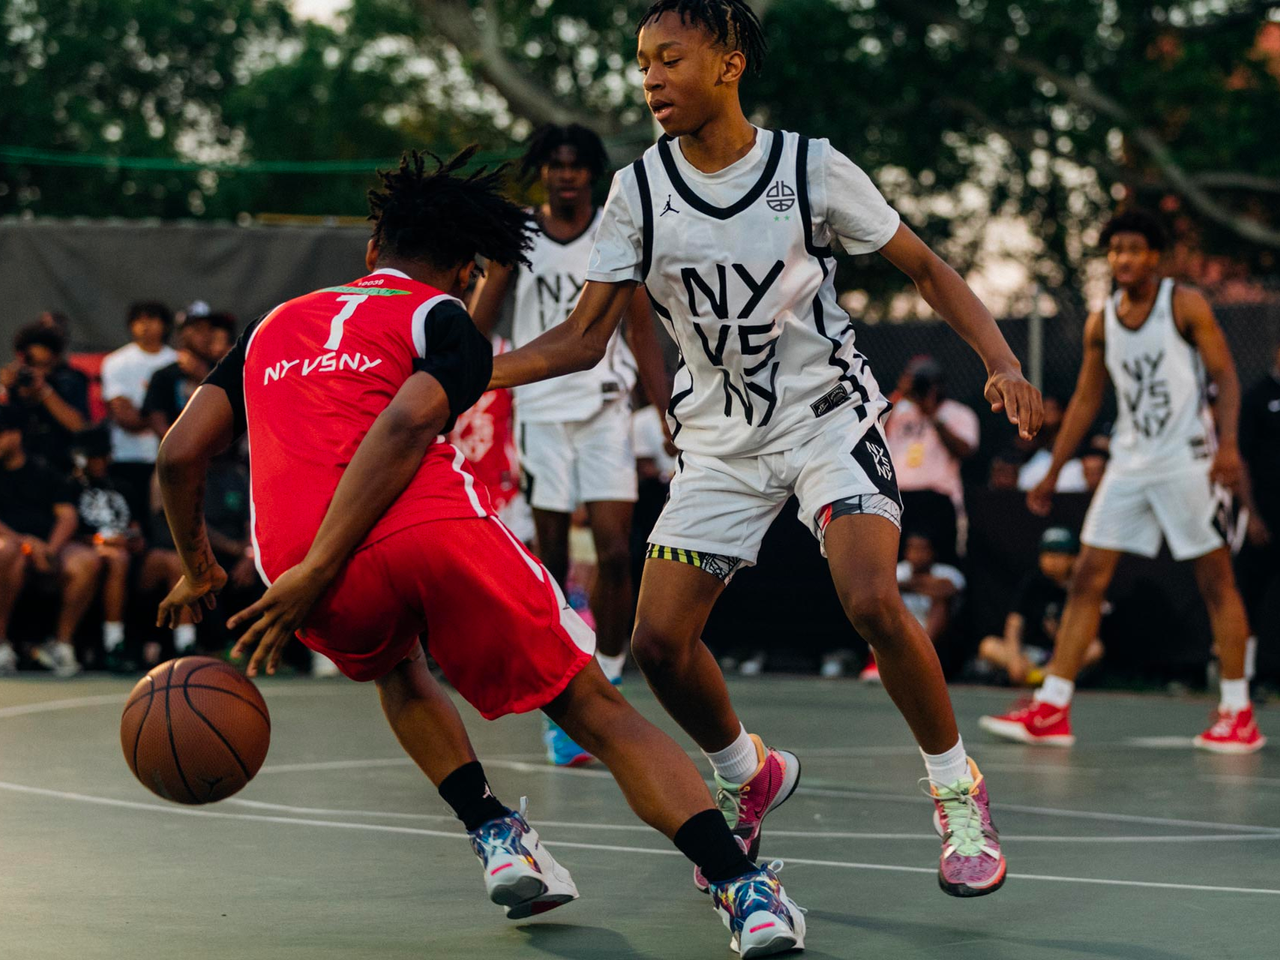 Mineraalwater voor mij vredig The Nike 'NY vs NY' 2022 Basketball Tournament Concludes at Rucker Park -  Sneaker Freaker